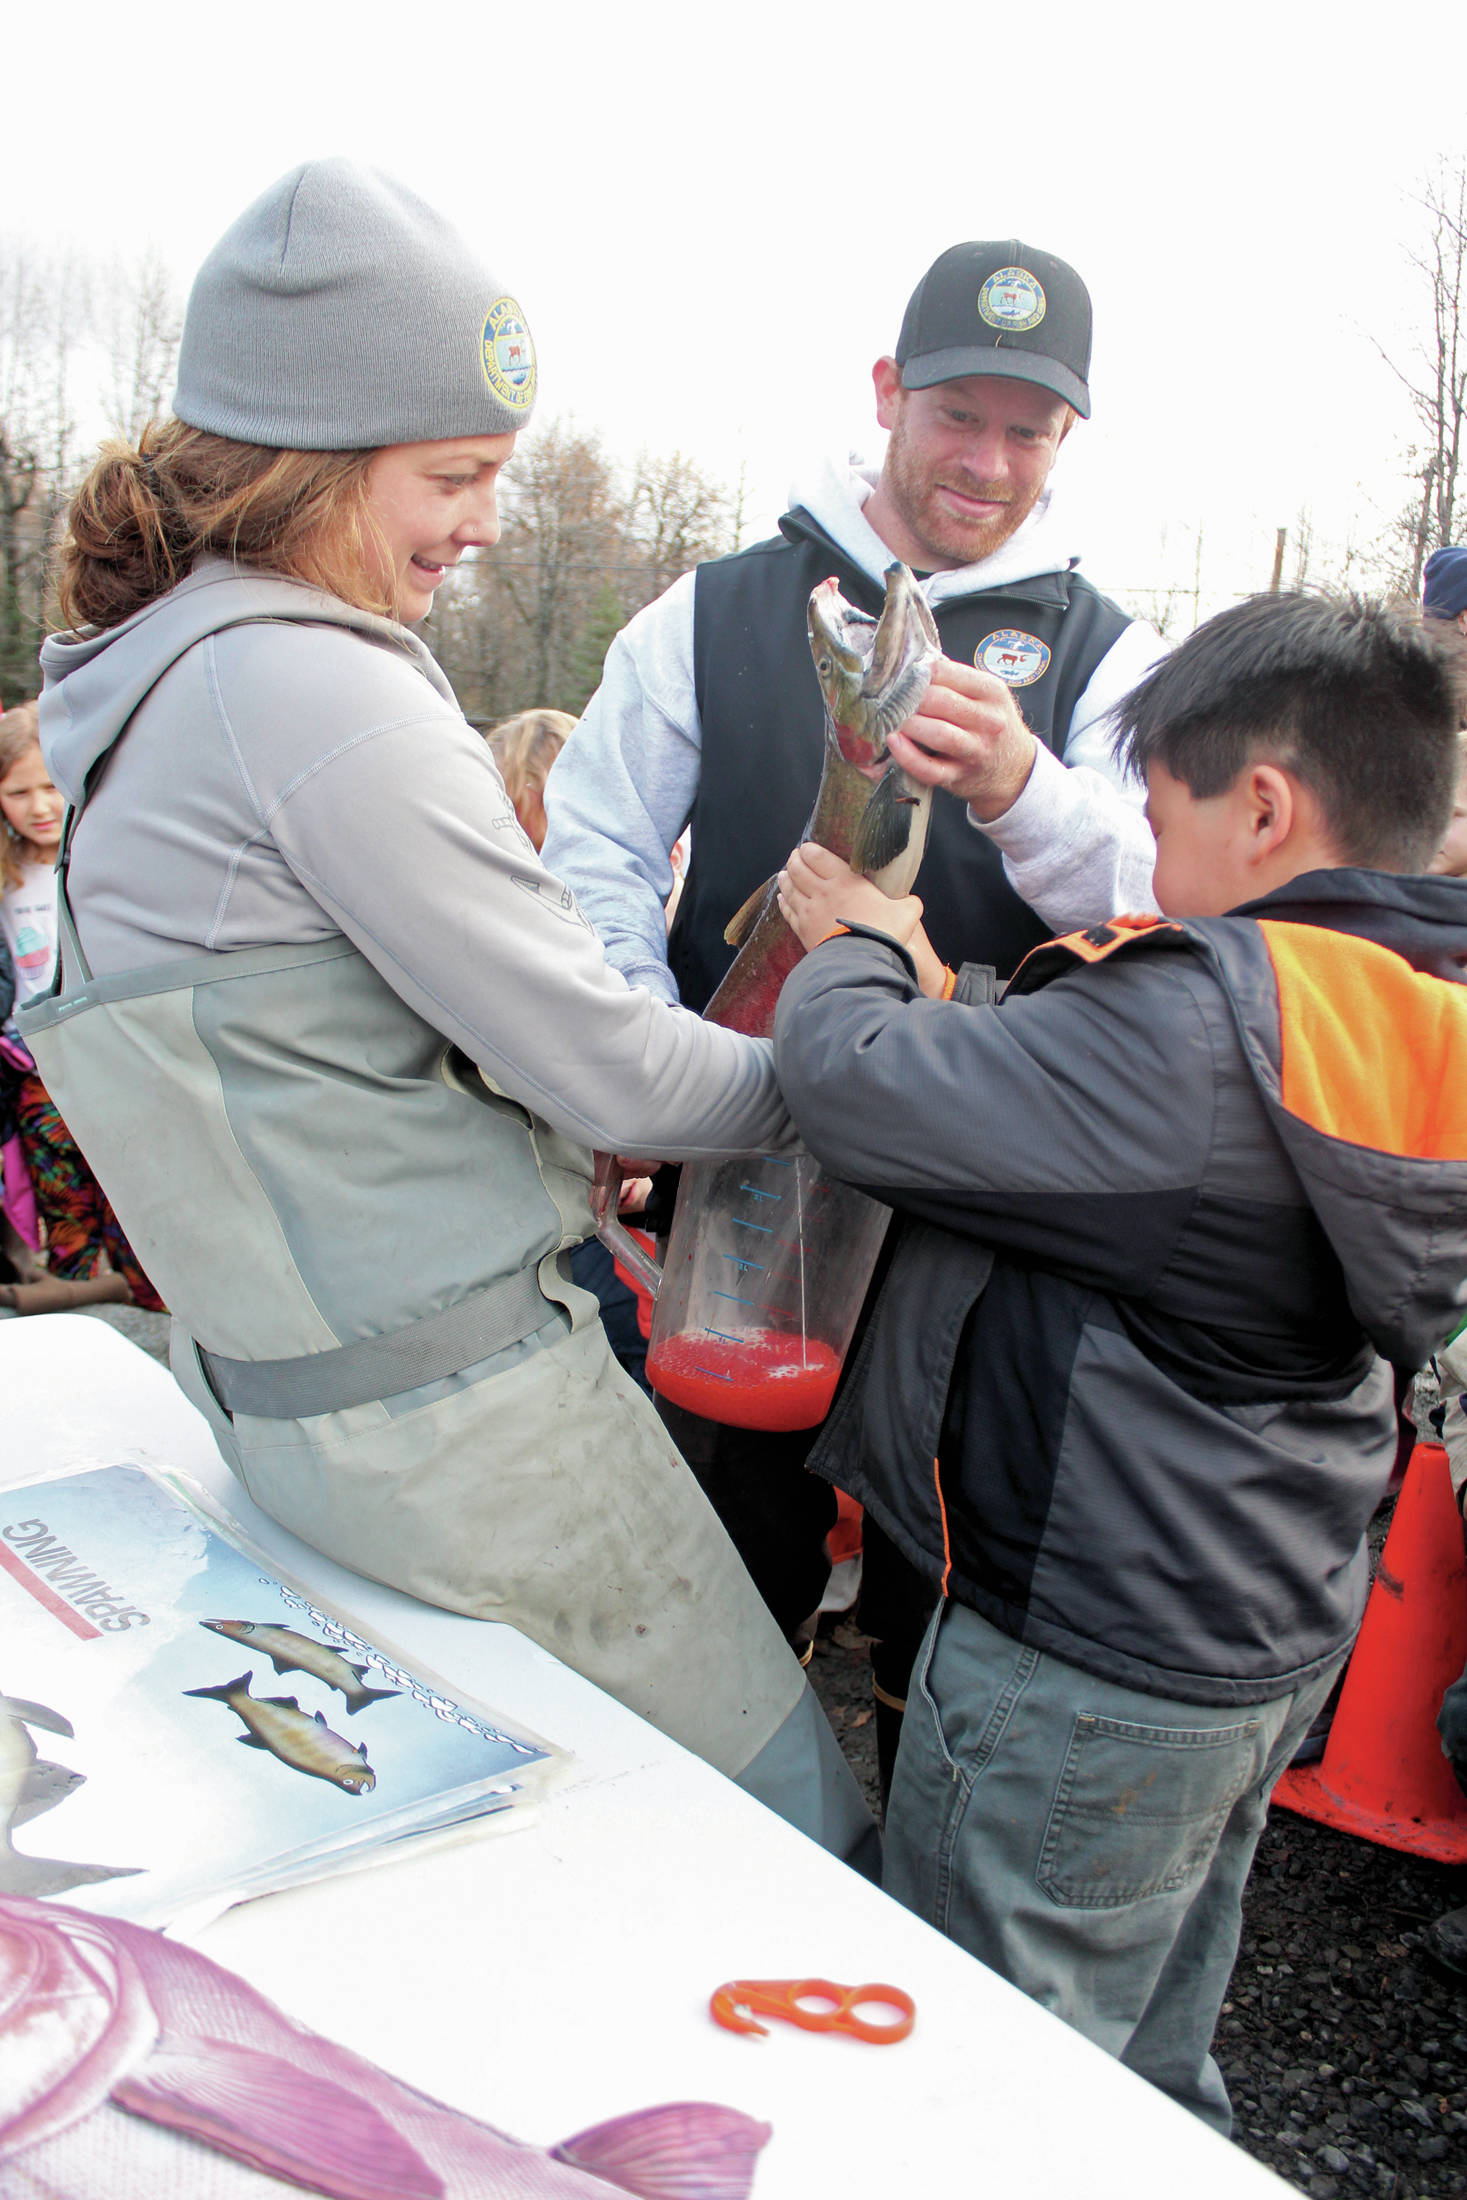 Alaska Department of Fish and Game biologists Holly Dickson (left) and Andrew Waldo (center) help Chapman School second grader Khian Tangnon (right) empty the milt from a male salmon into a pitcher of salmon eggs during the annual egg take event at the Anchor River on Thursday, Oct. 10, 2019 in Anchor Point, Alaska. The egg take is the first phase in the Salmon in the Classroom project. (Photo by Megan Pacer/Homer News)